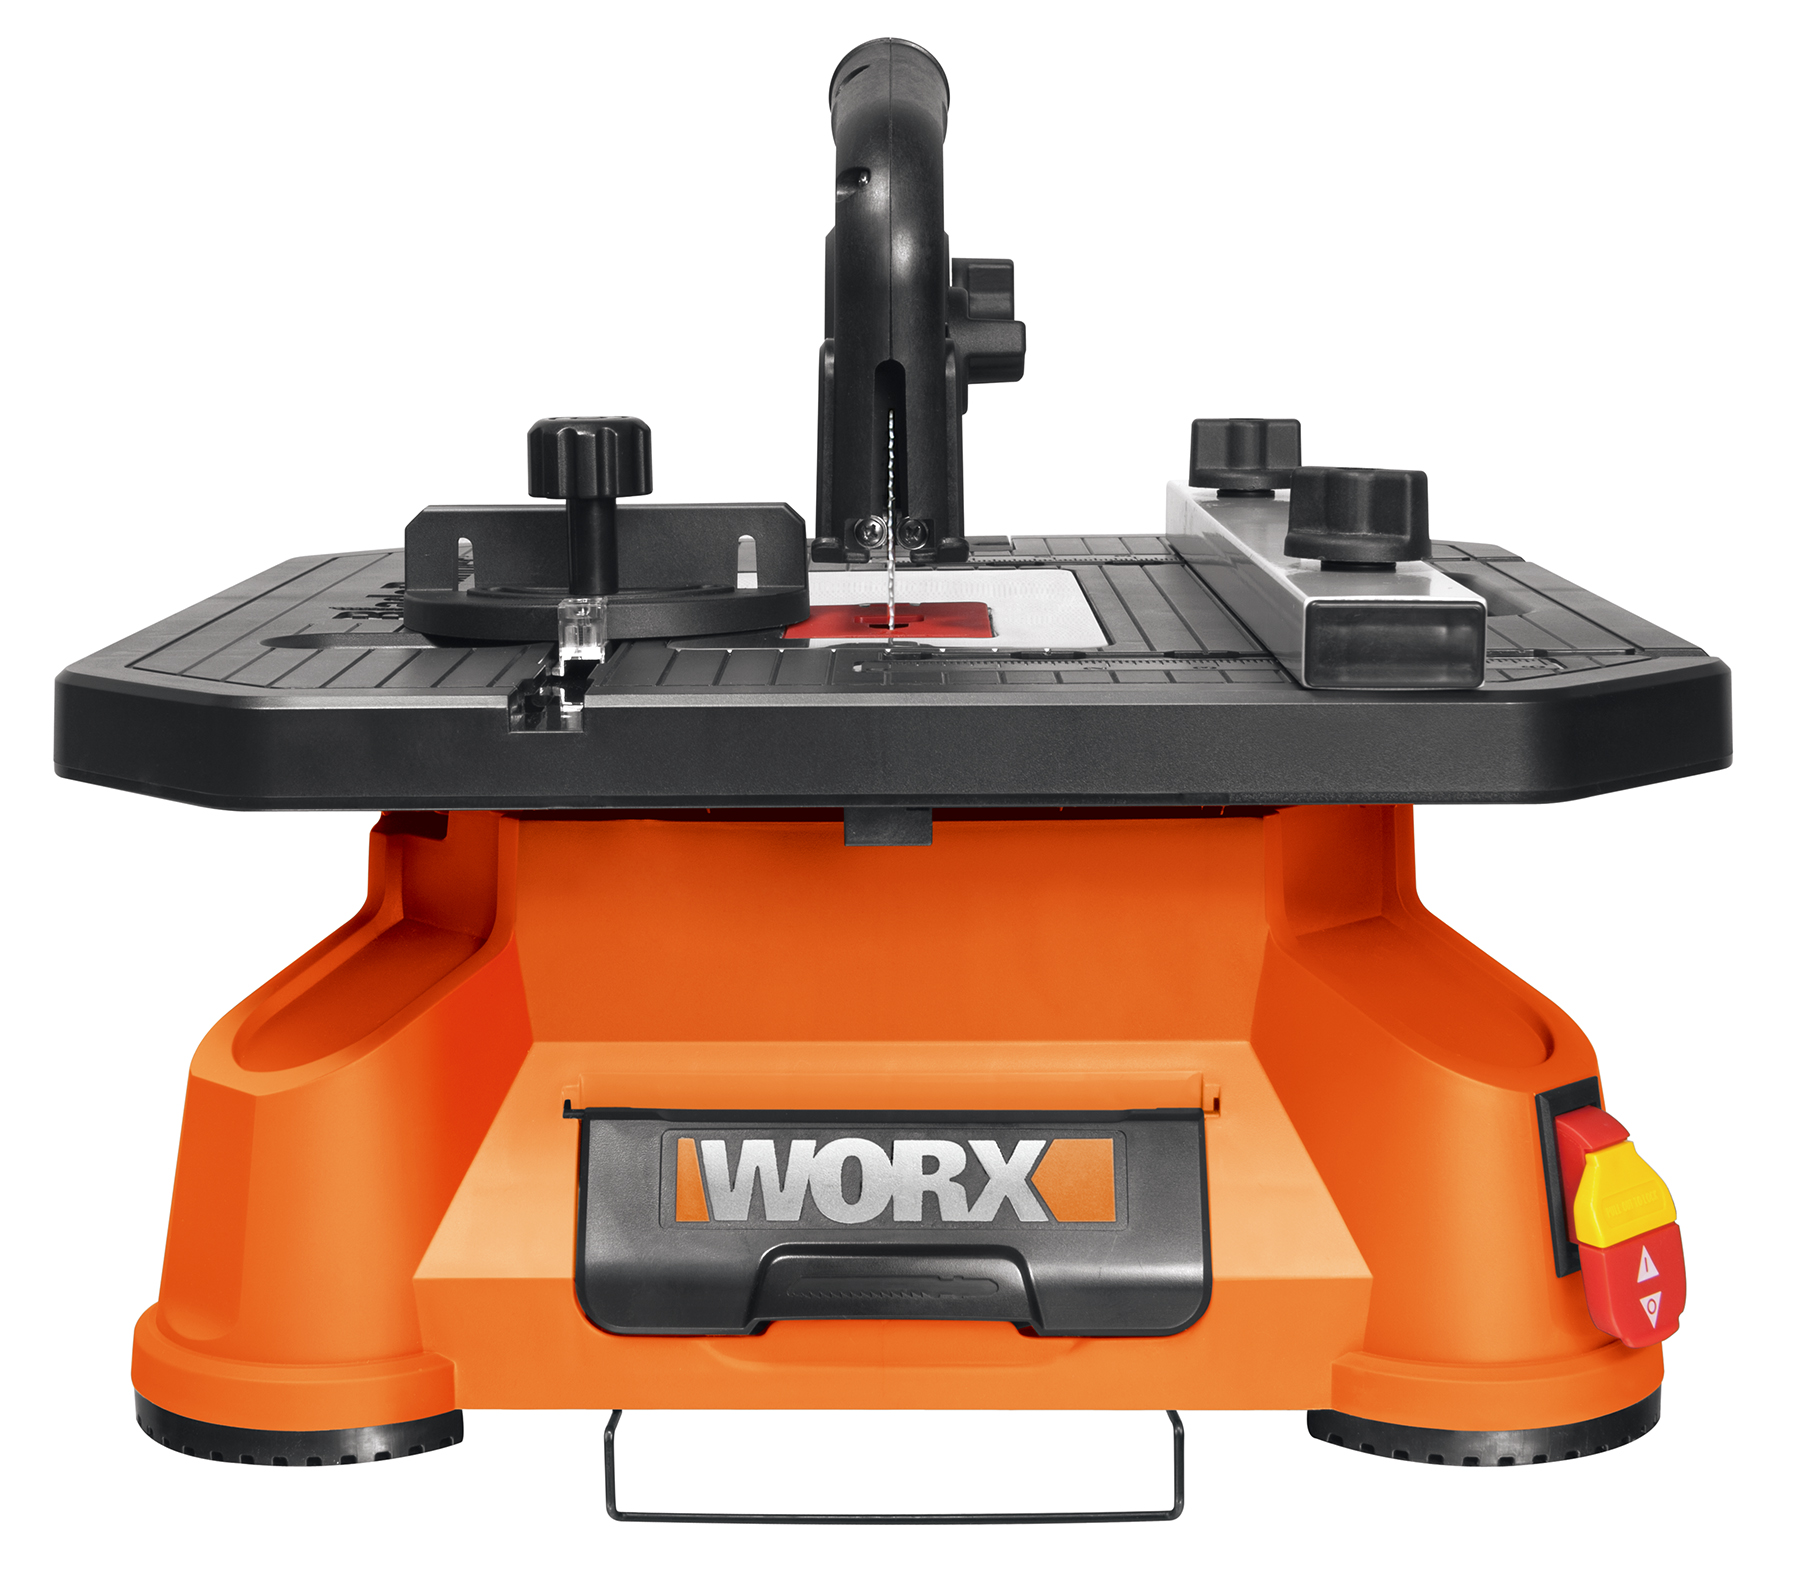 Besides rip cuts and crosscuts, the WORX BladeRunner also makes scroll, inside and miter cuts using 4-in., T-shank jigsaw blades.